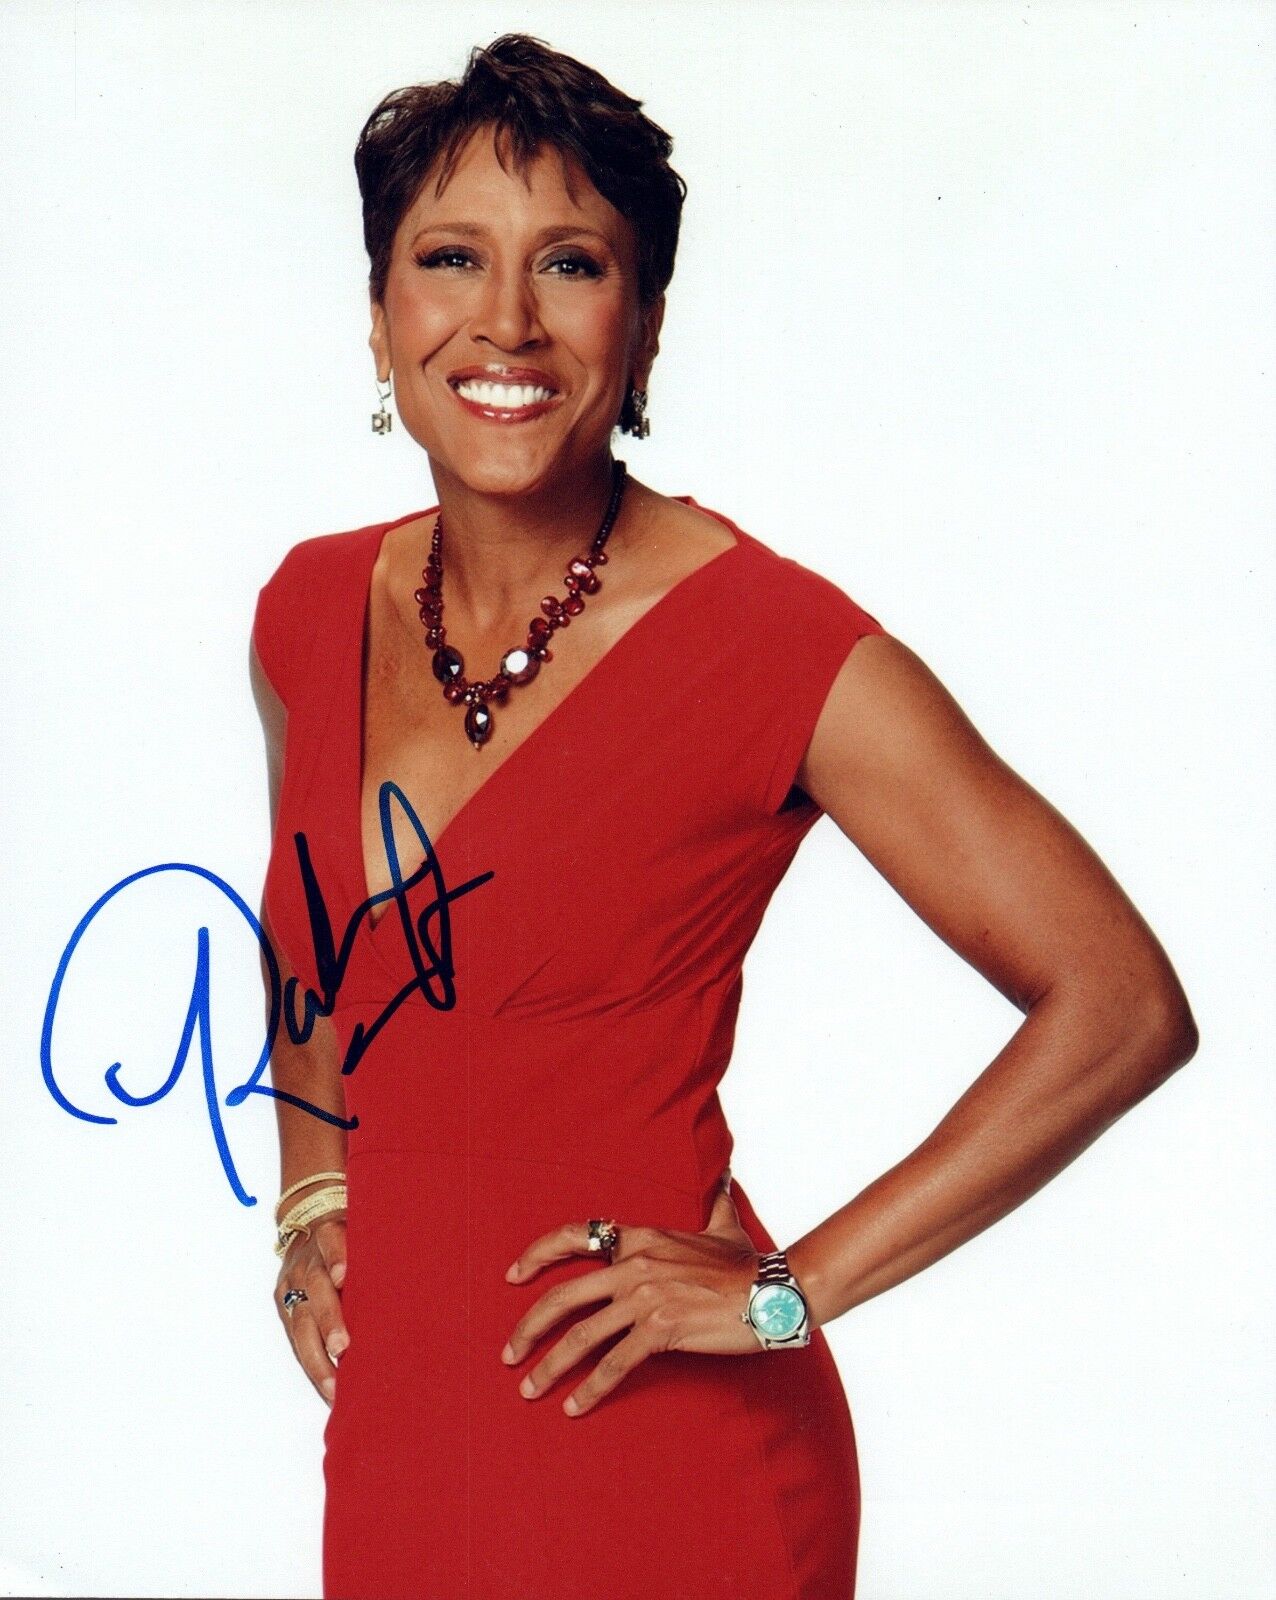 Robin Roberts Signed Autographed 8x10 Photo Poster painting Good Morning America COA VD